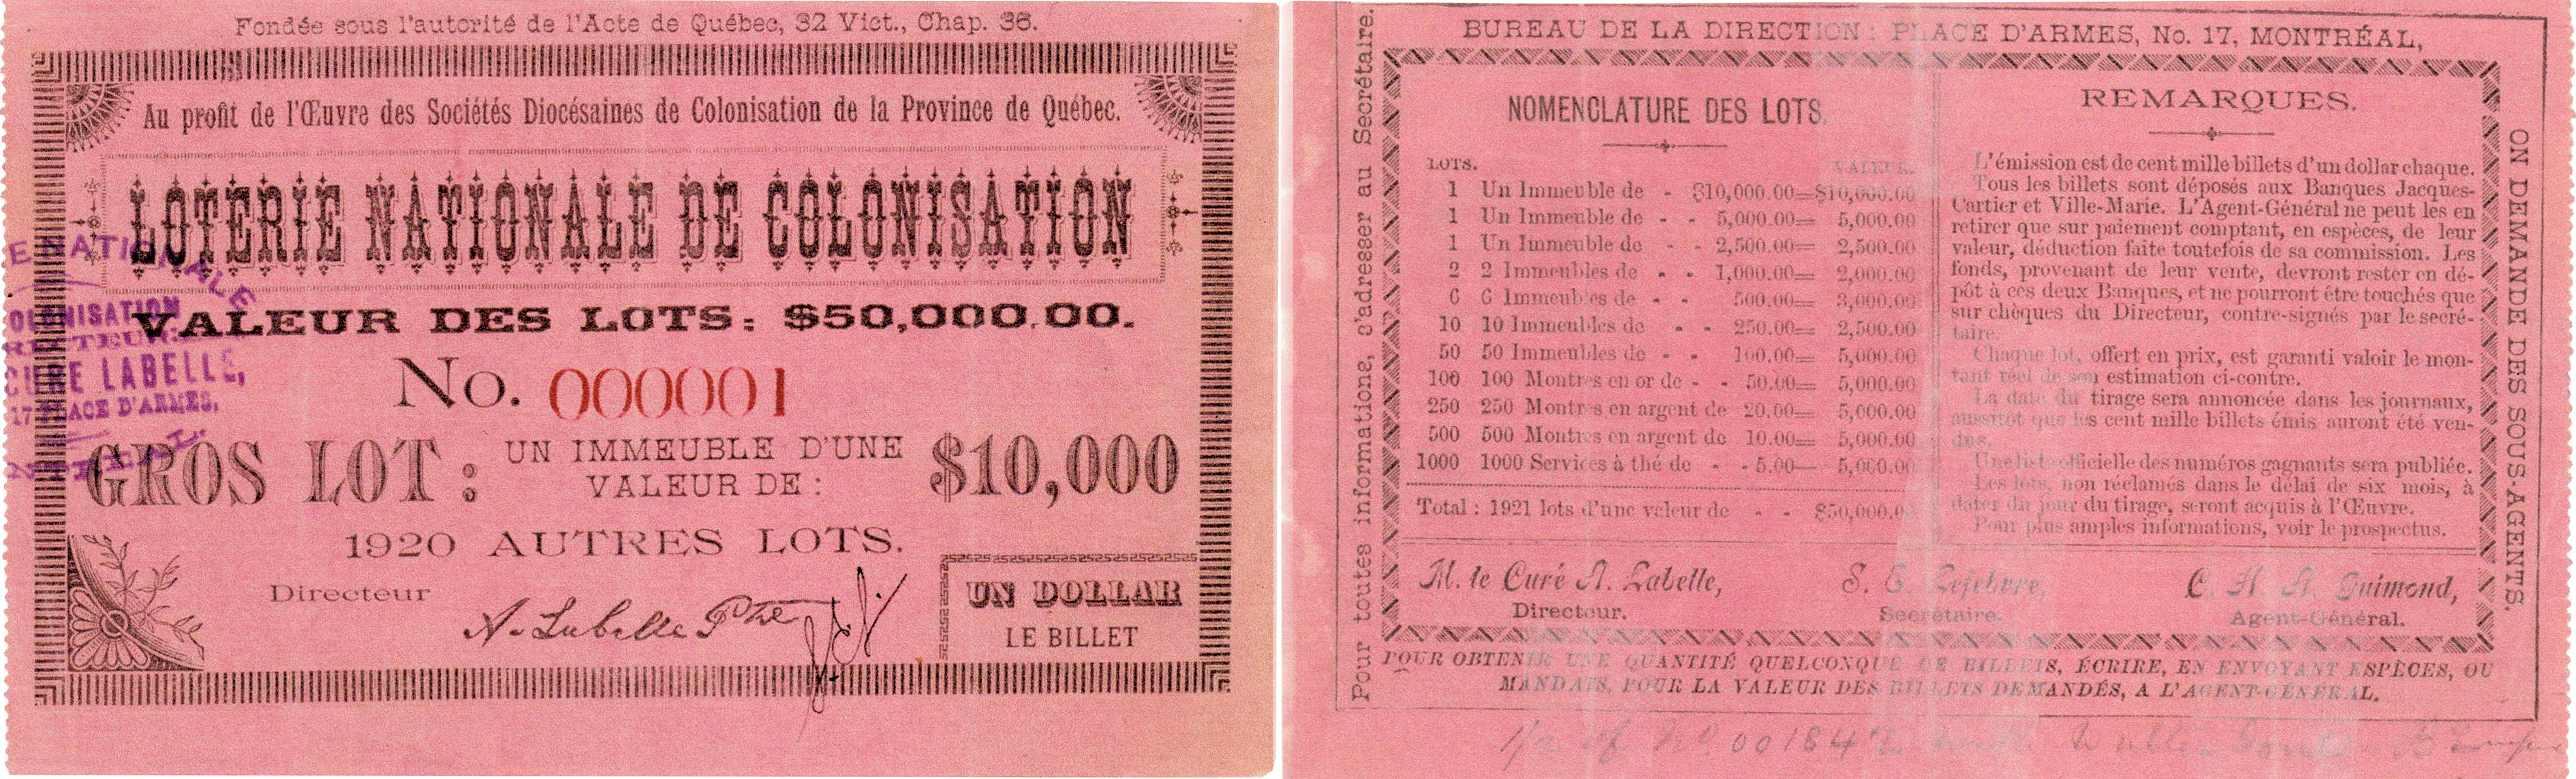 Images of the obverse and reverse of a lottery ticket printed on bright pink rectangular card stock. The obverse bears the name of the lottery, the beneficiary organization, the number and cost of the ticket, a description of the grand prize, and the signature of the lottery director. The reverse bears the full list and number of prizes to be won, remarks about the lottery, and the names of three administrators.